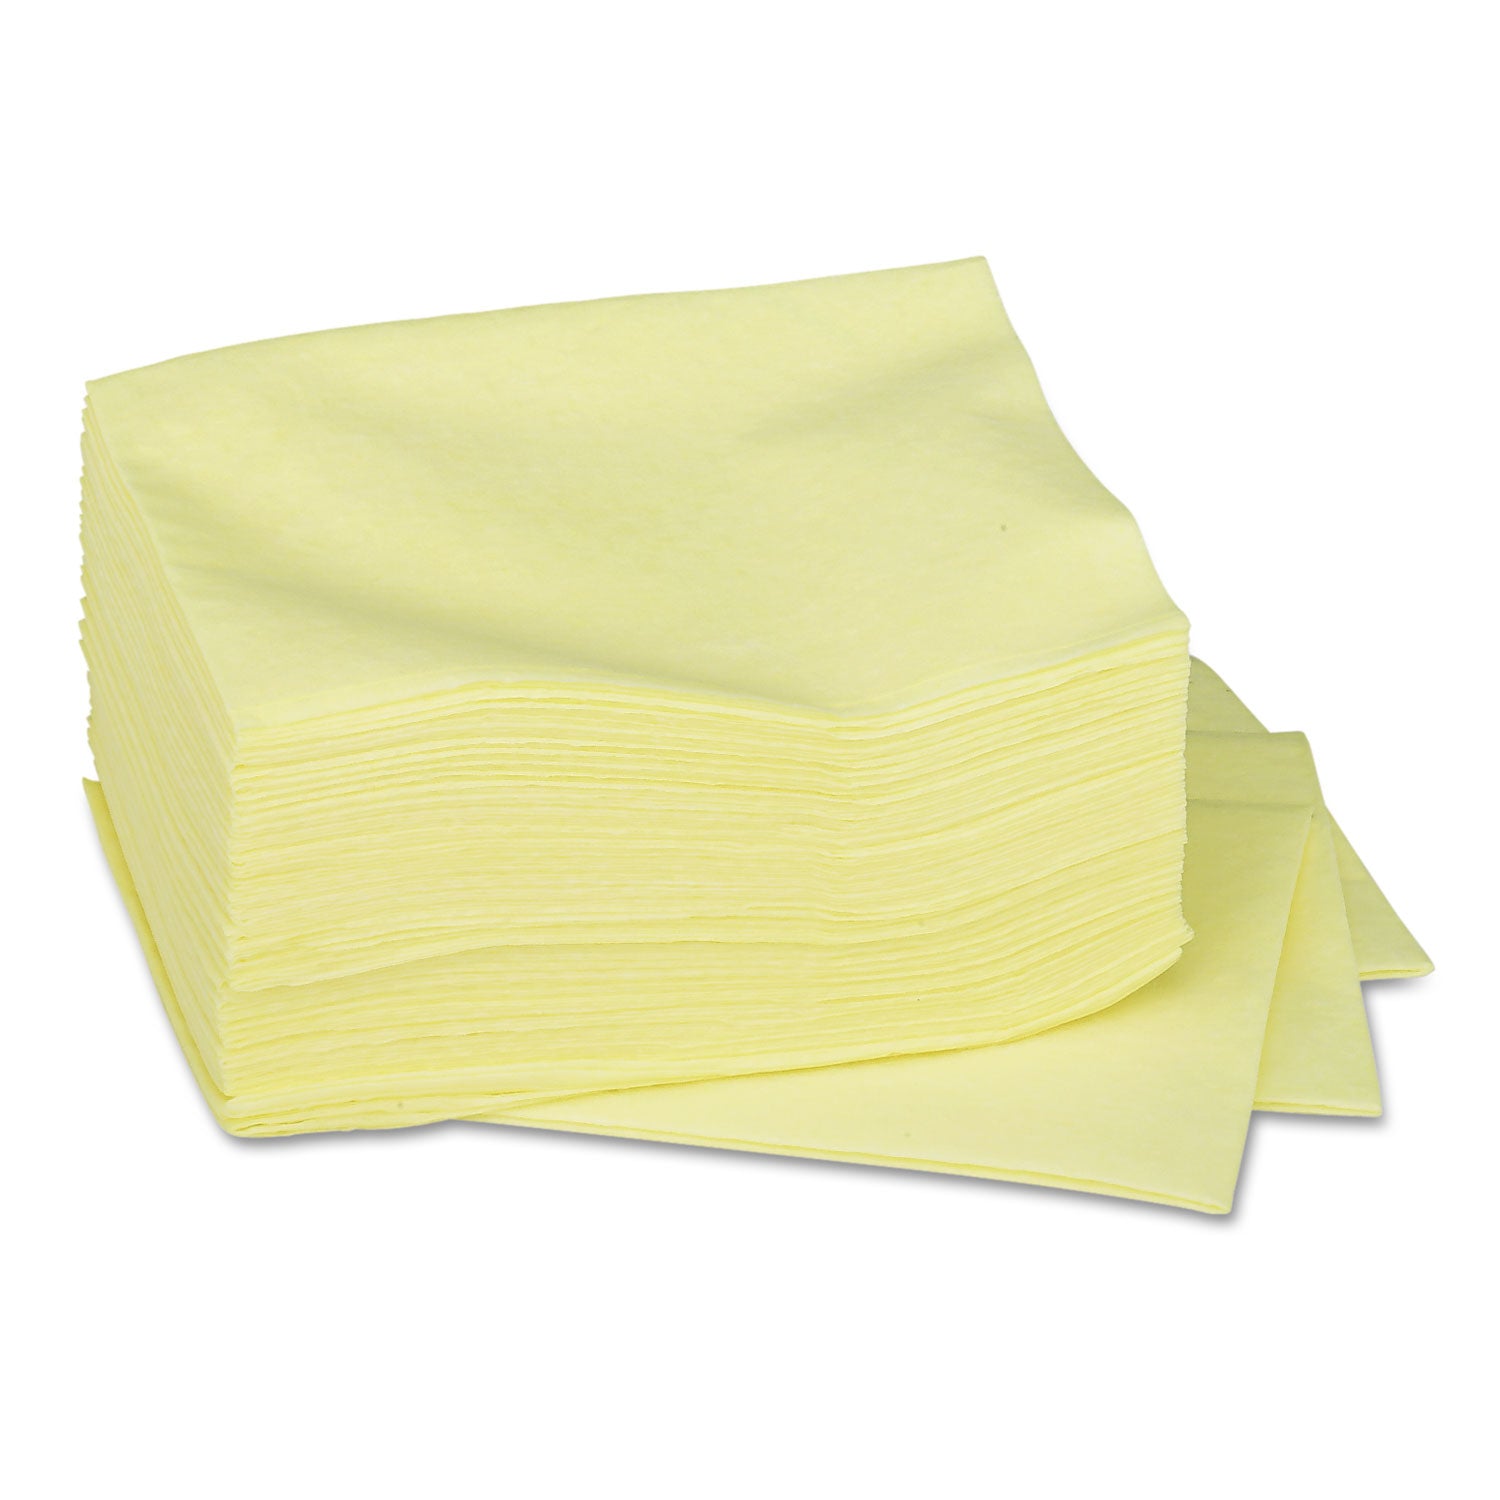 Dusting Cloths Quarterfold, 17 x 24, Unscented, Yellow, 50/Pack, 4 Packs/Carton - 